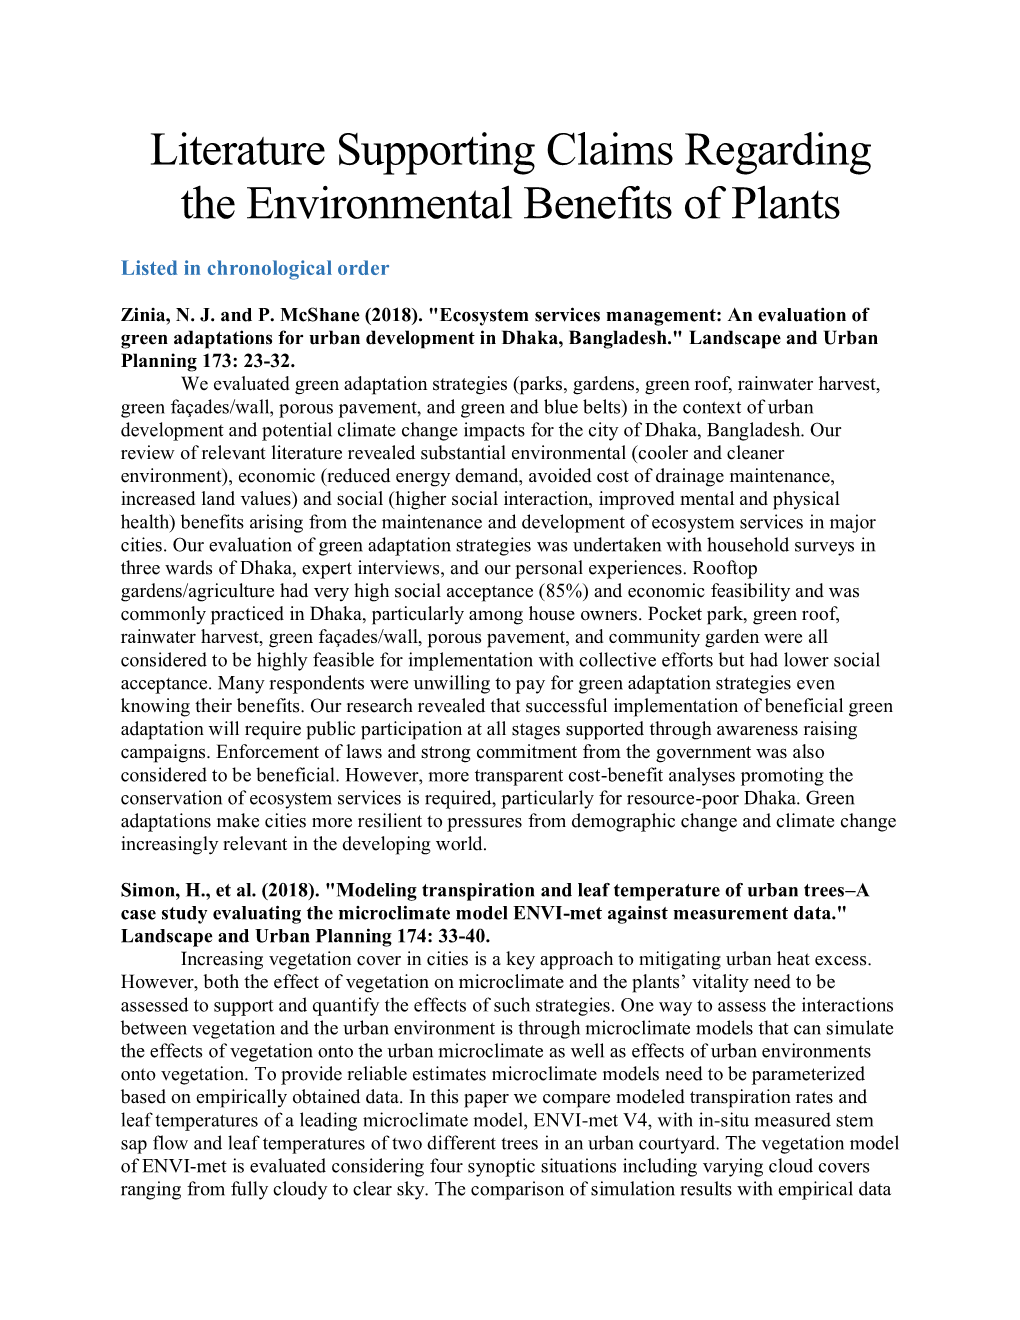 Literature Supporting Claims Regarding the Environmental Benefits of Plants